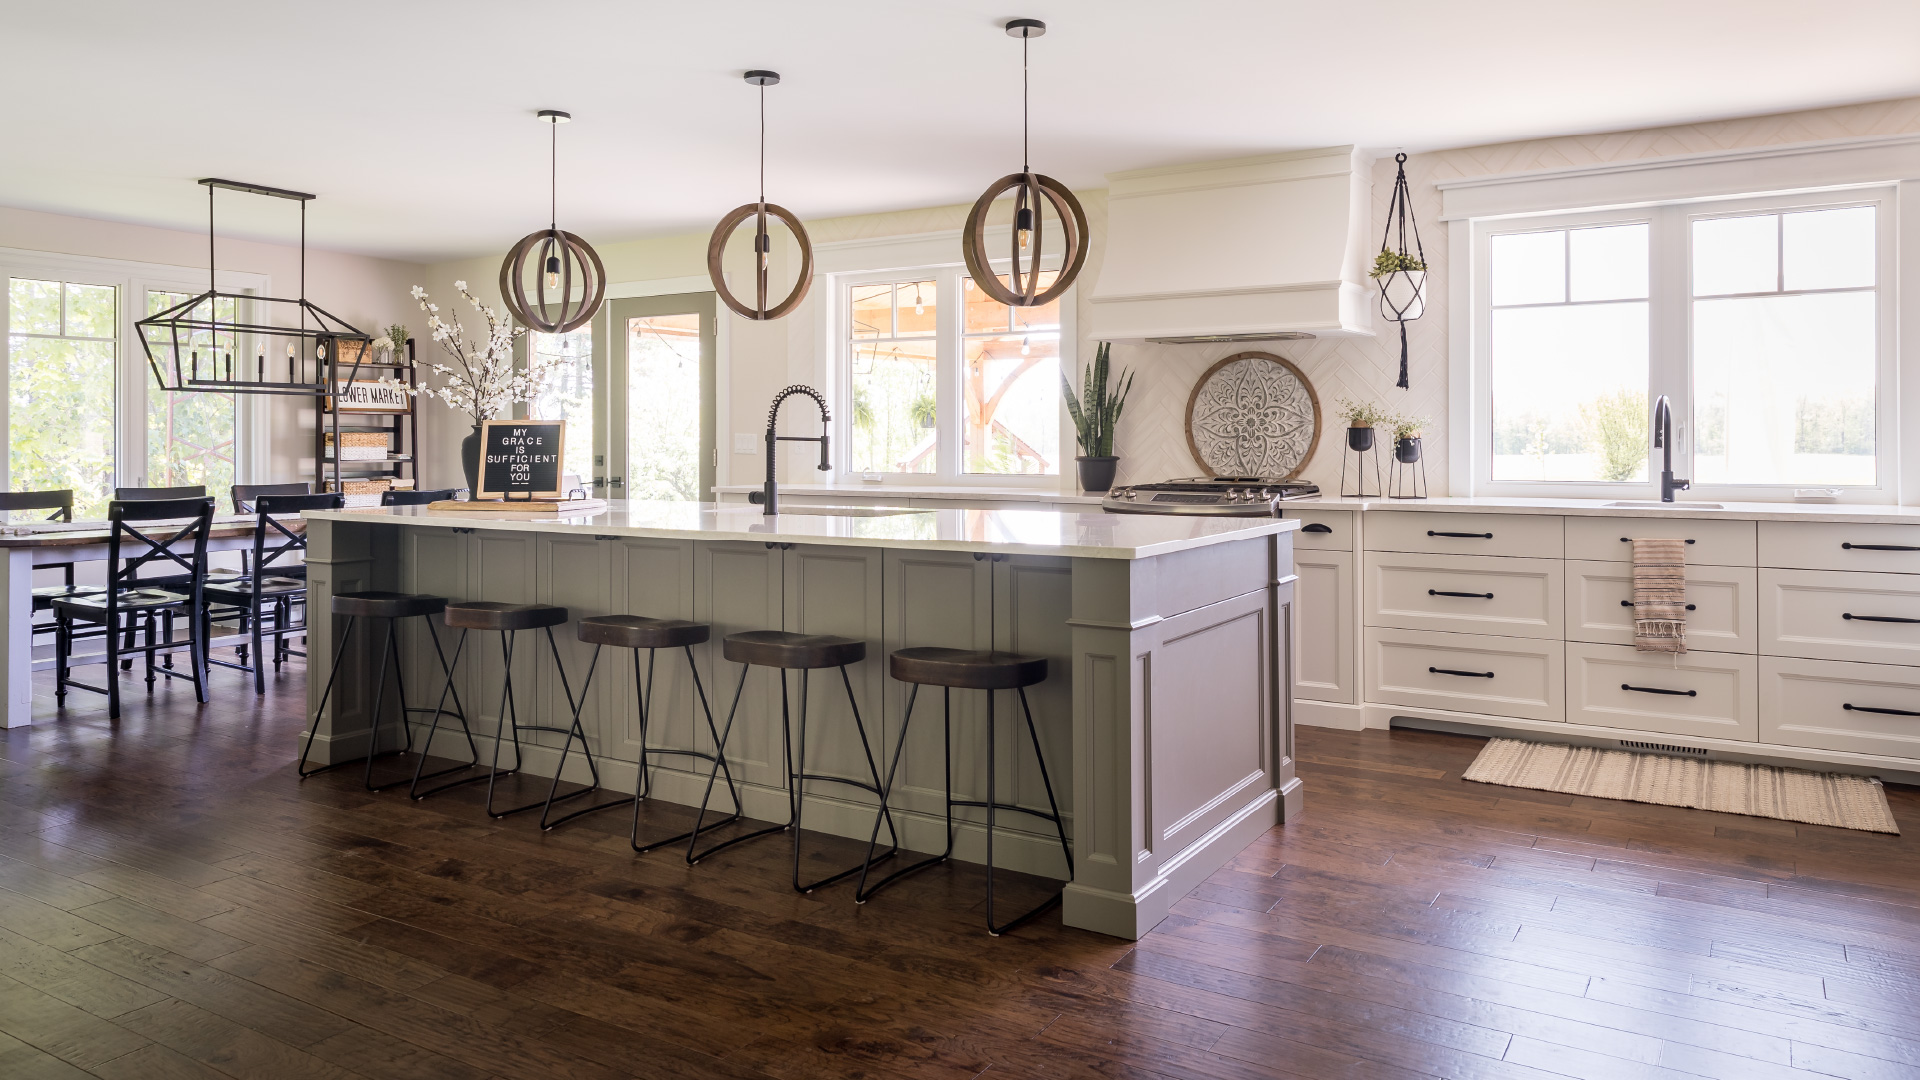 A large custom kitchen island with stools